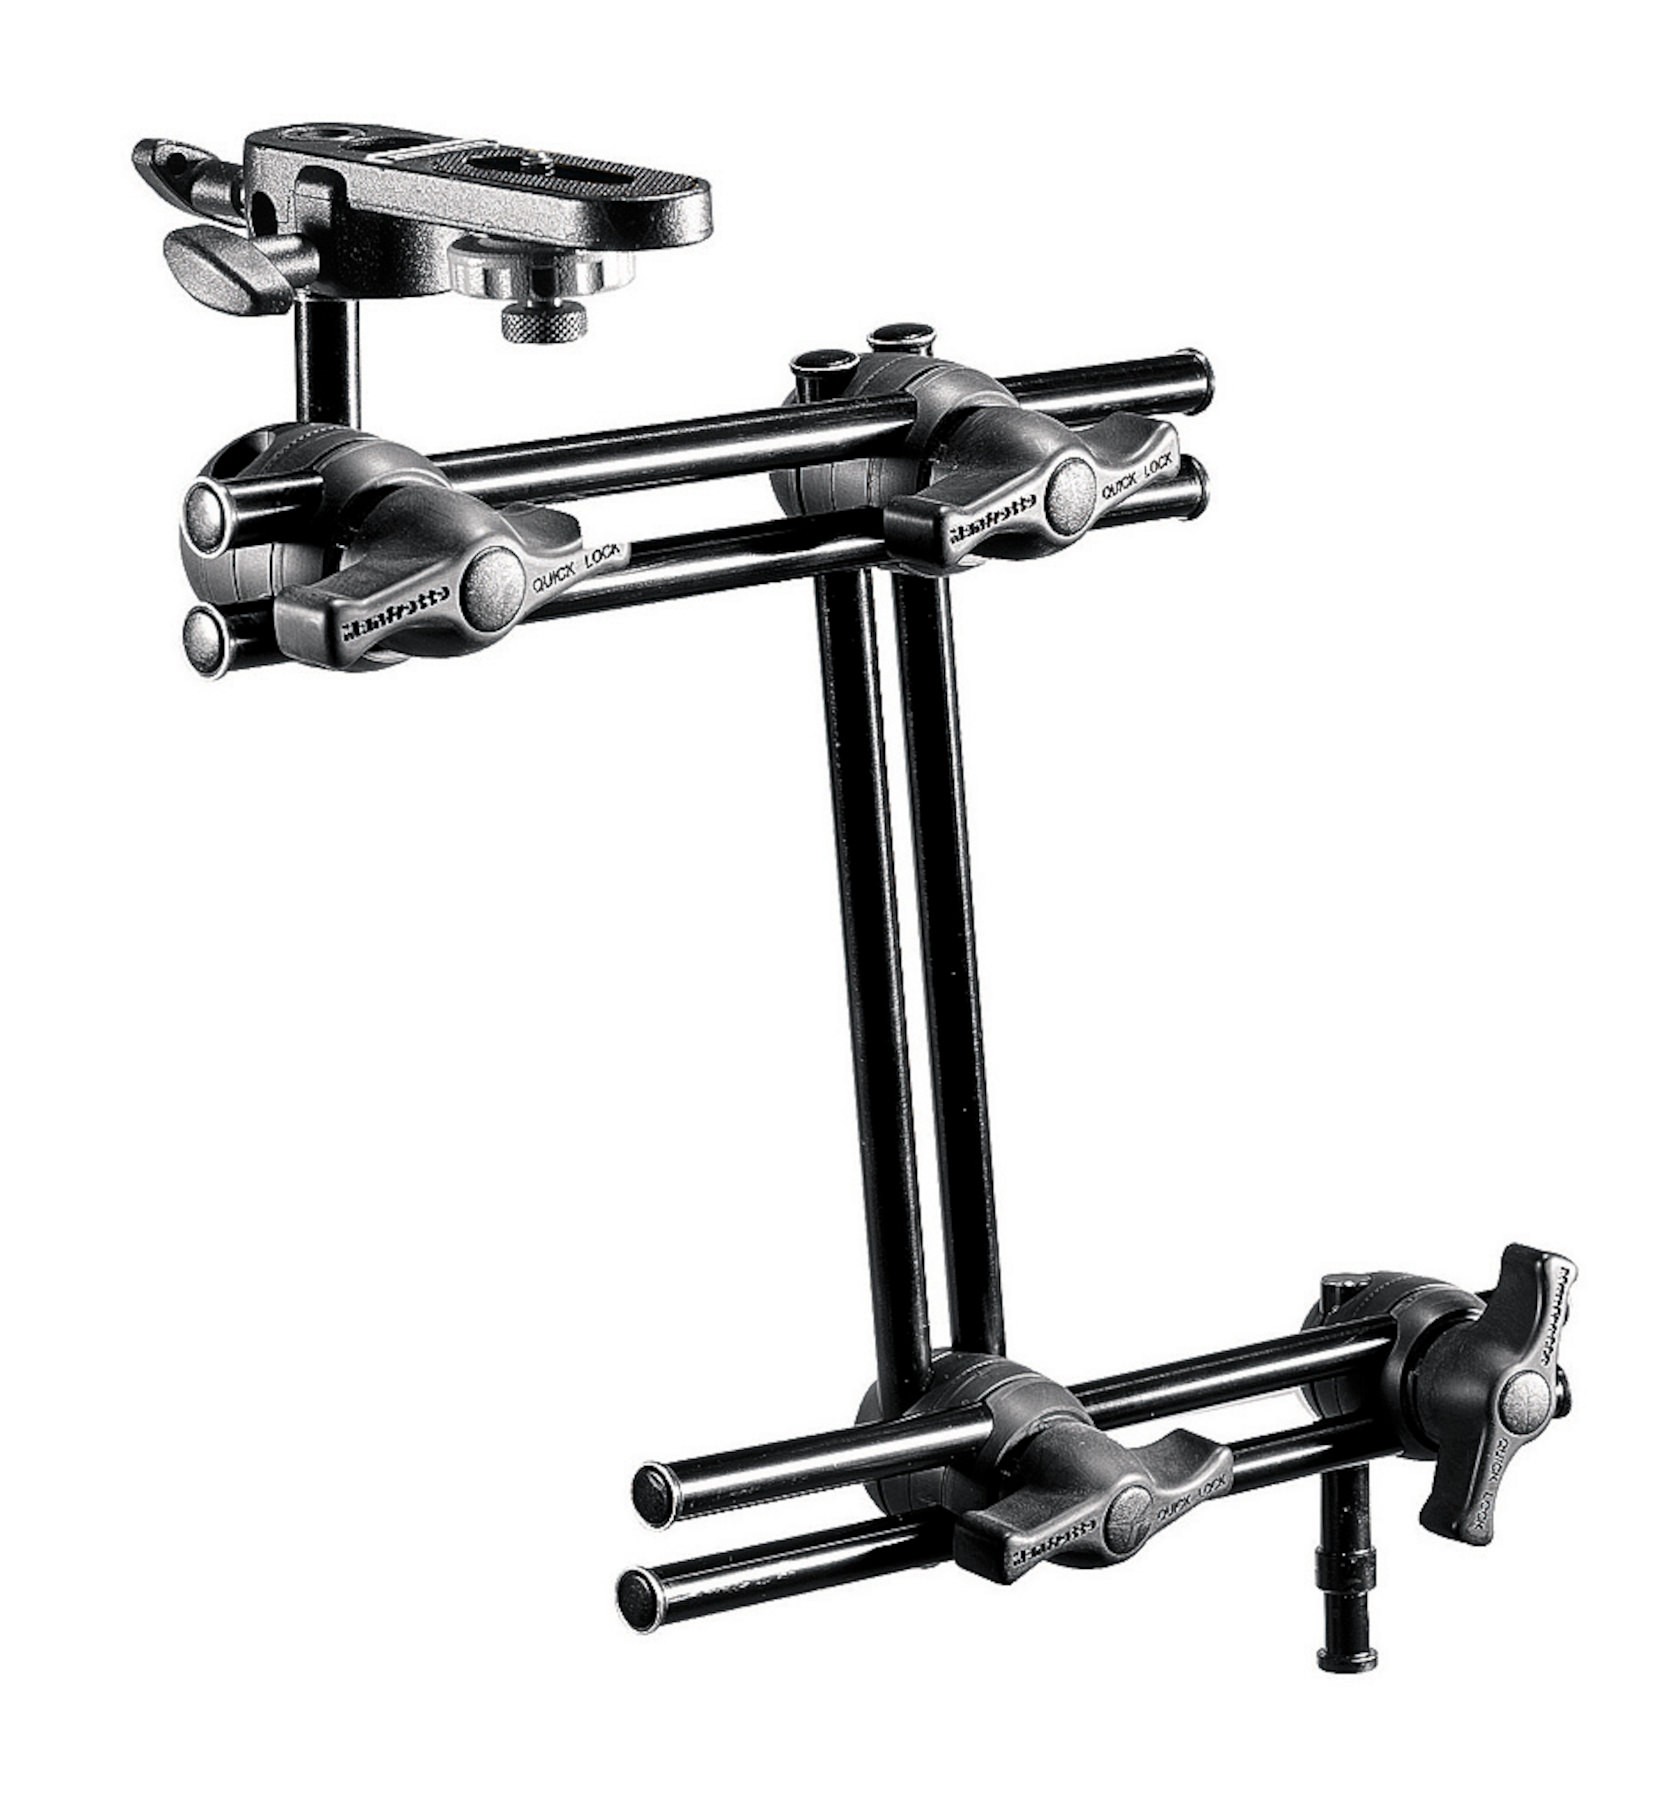 3-Section Double Articulated Arm with Camera Attachment